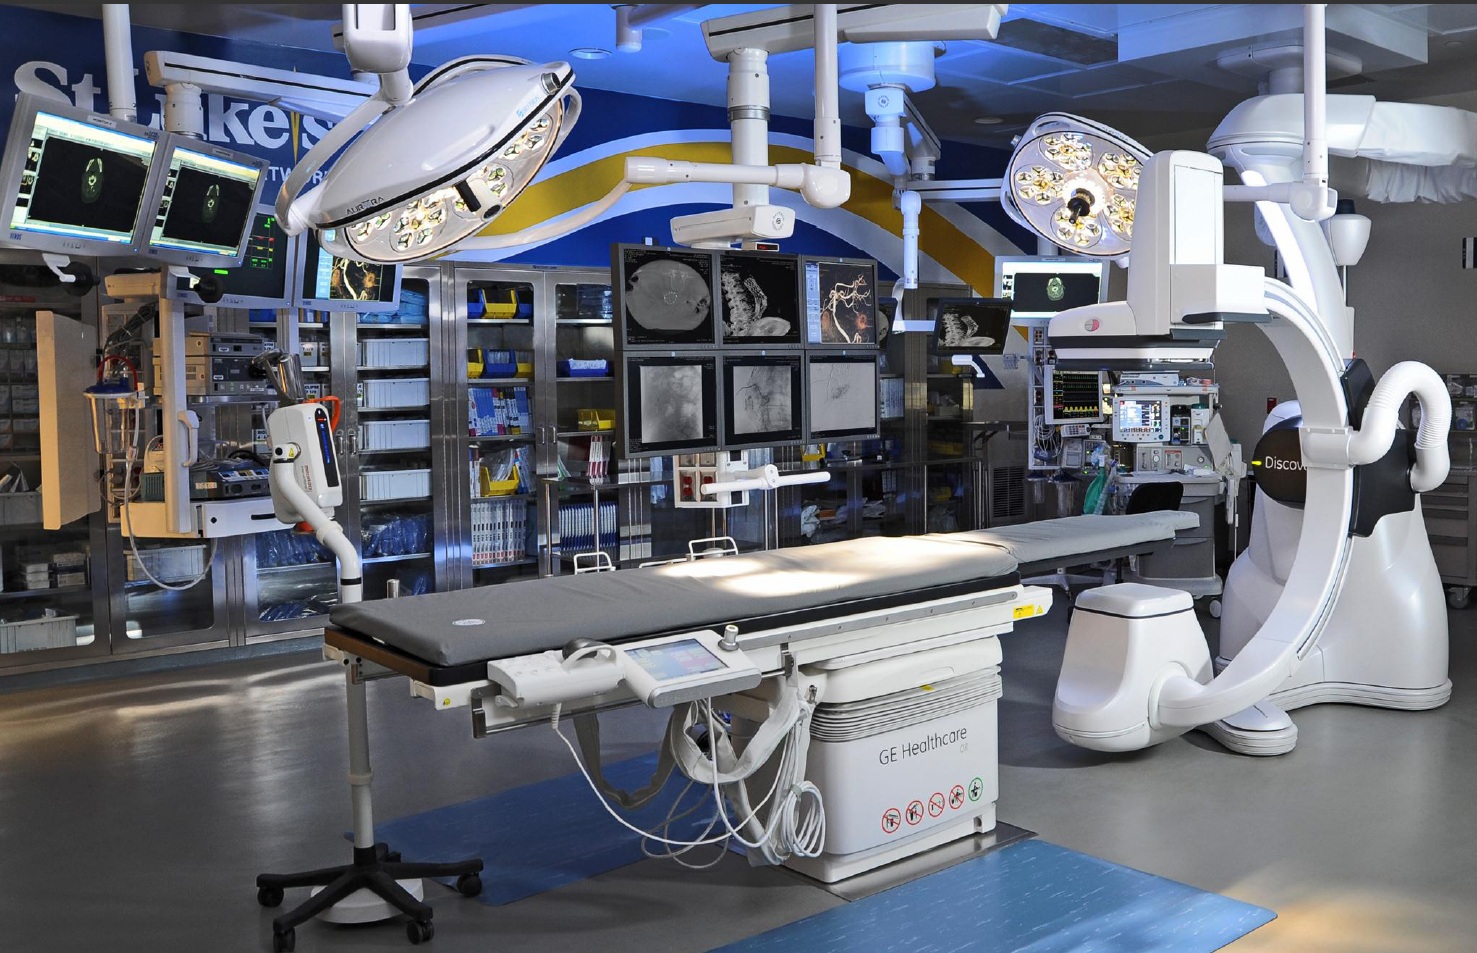 Hybrid-OR-Operating-Room-GE-Discovery-IGS-730-Skytron-LED-Surgical-Lights-Equipment-Booms-PA-16.jpg